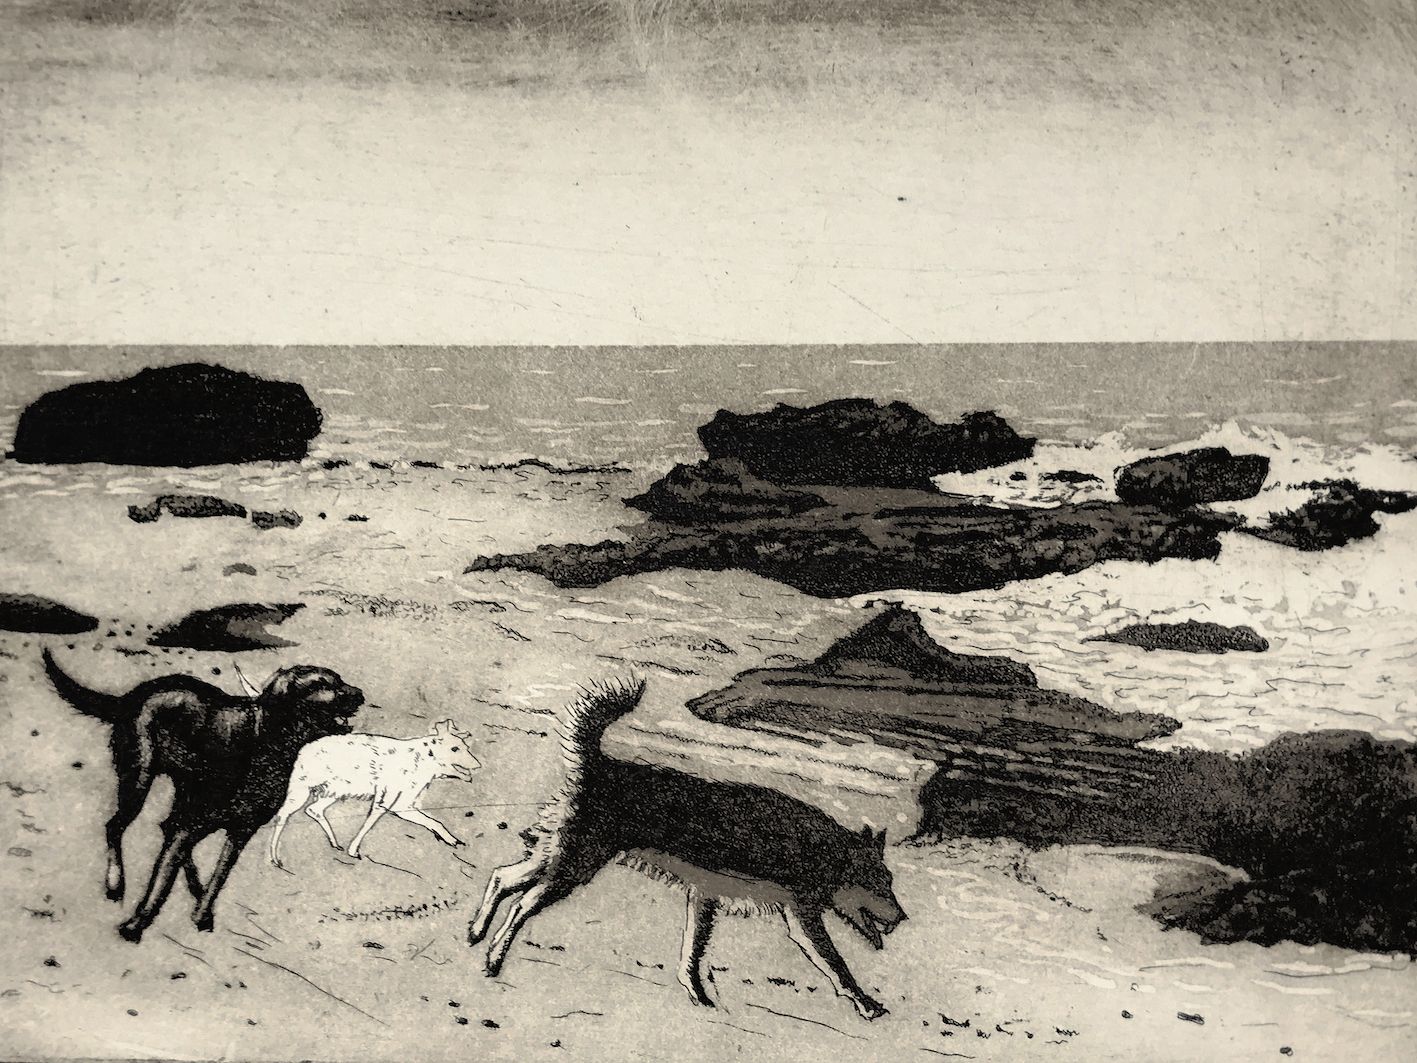 Dogs on a Beach by Tim Southall